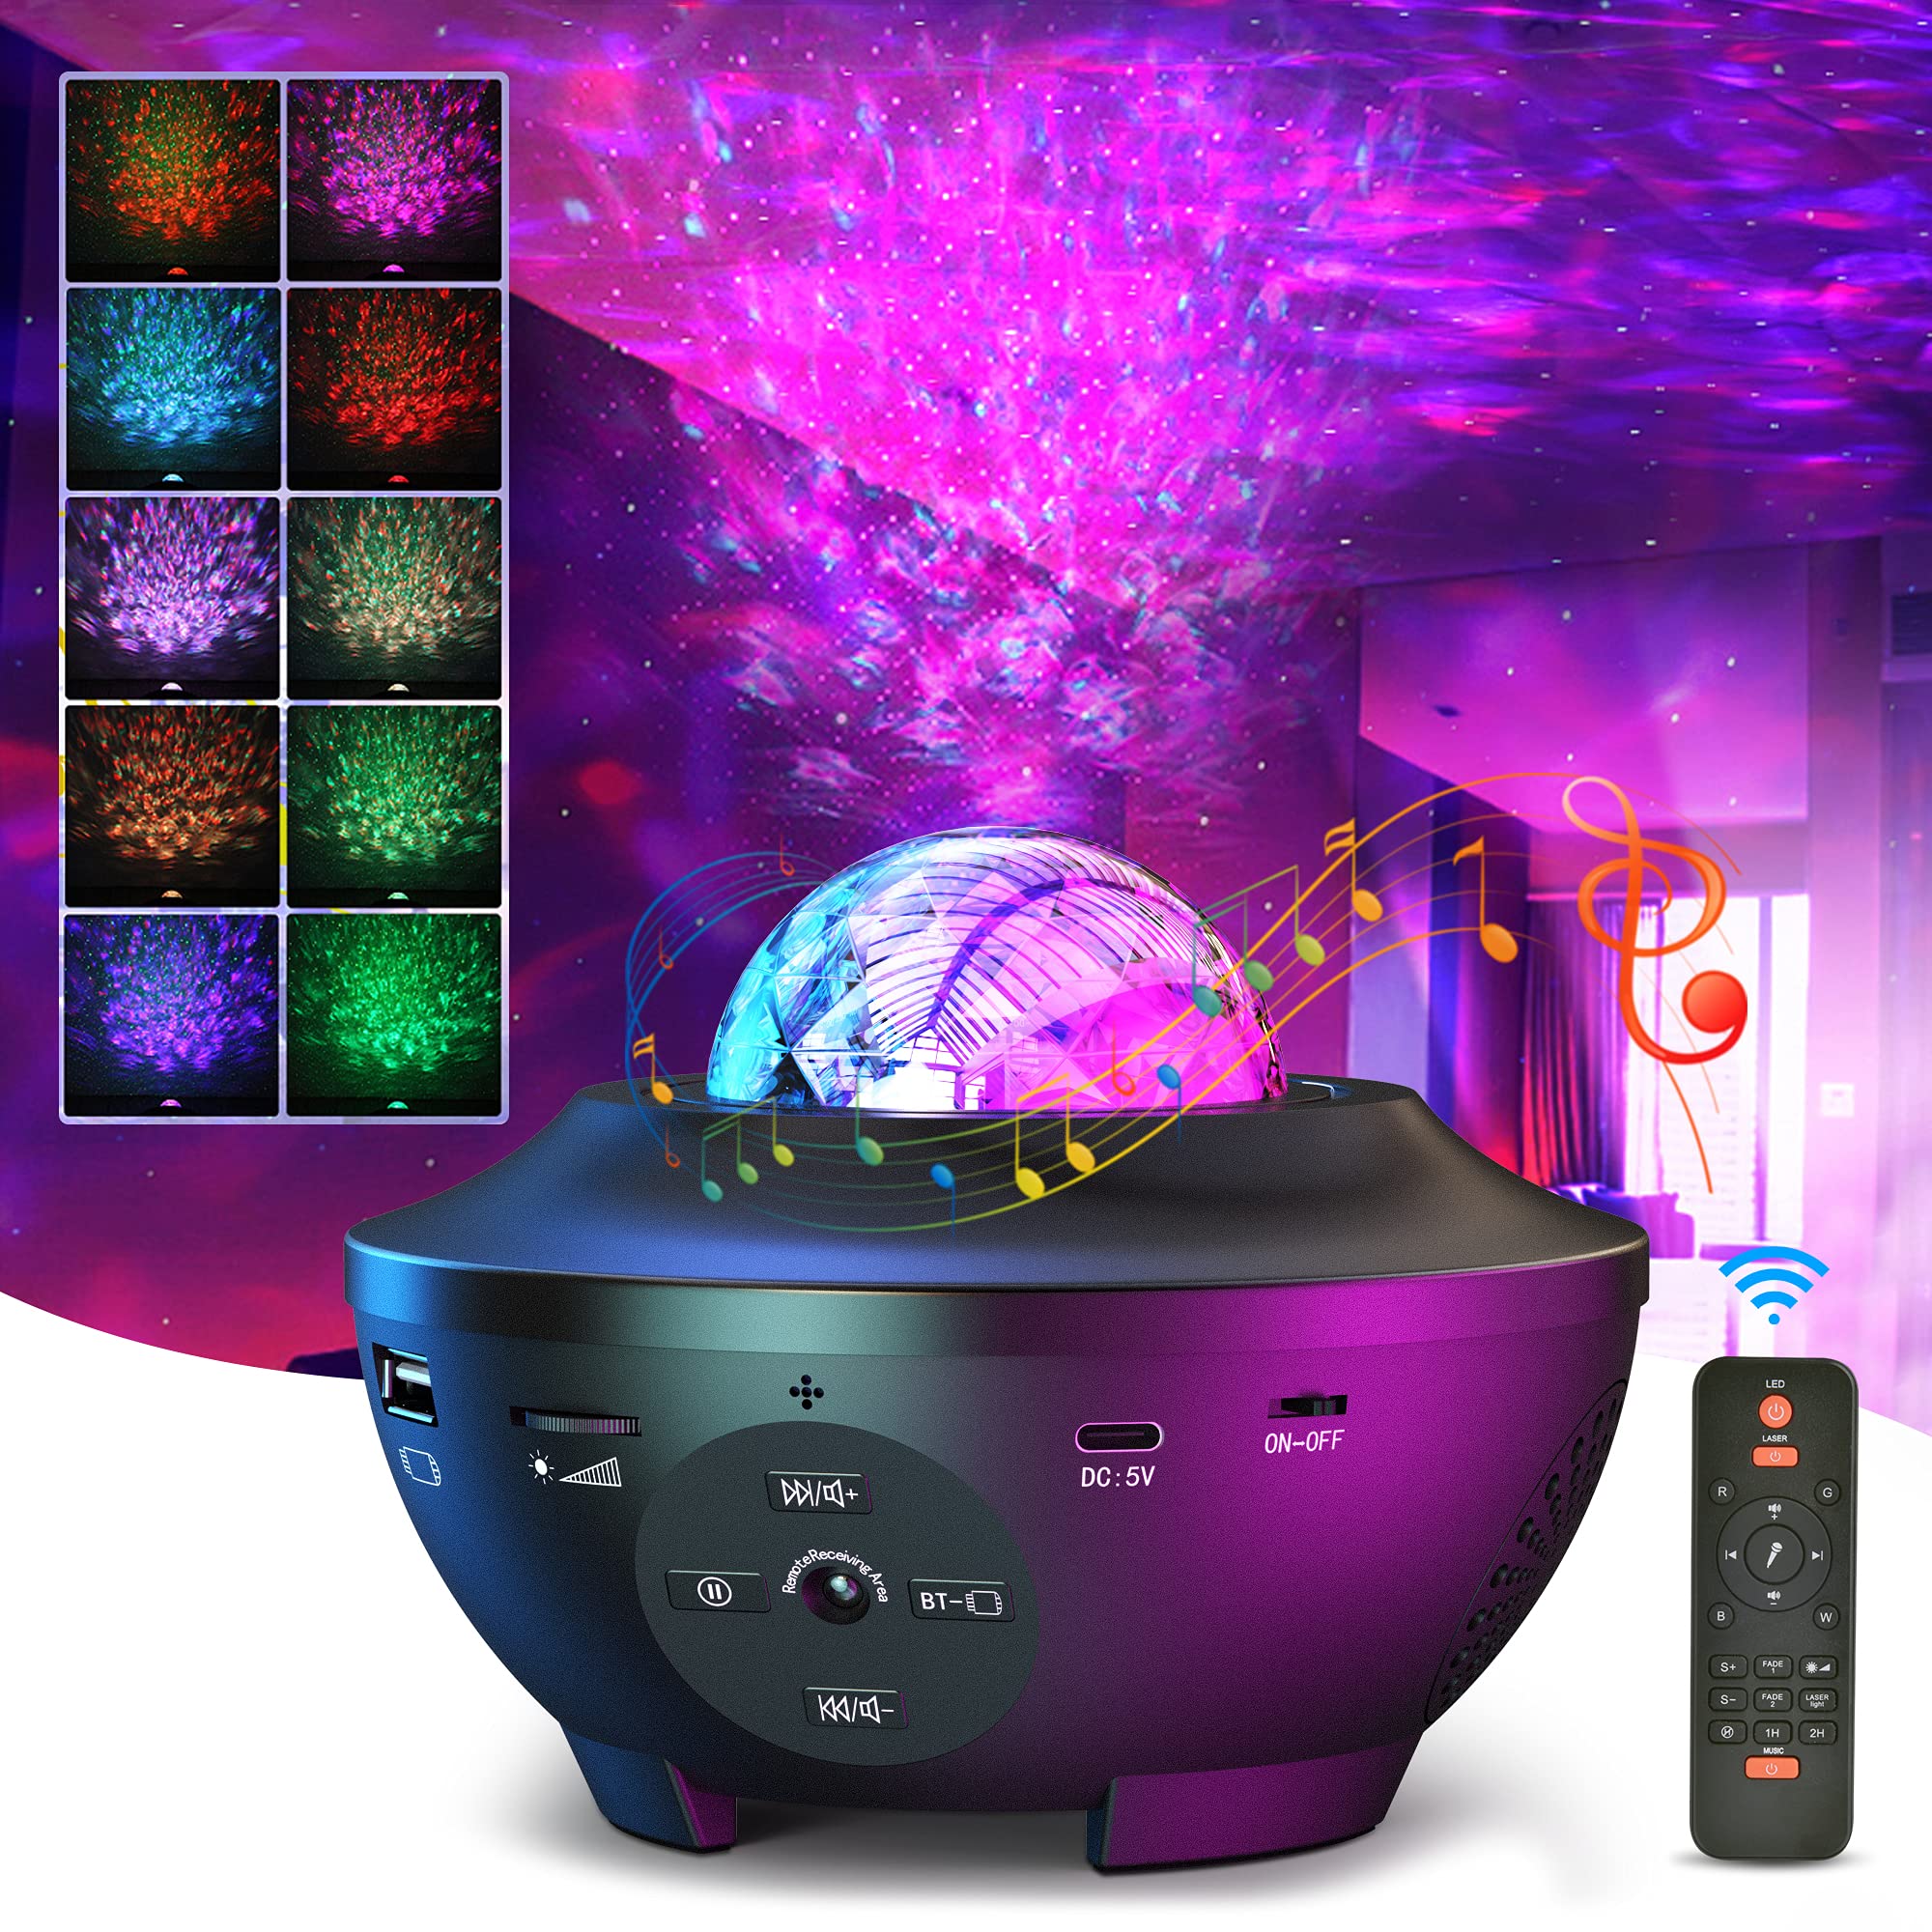 Star Projector Galaxy Light Projector Ocean Wave LED Night Light Lamp with Remote Control Colors Changing Music Bluetooth Speaker Timer for Baby